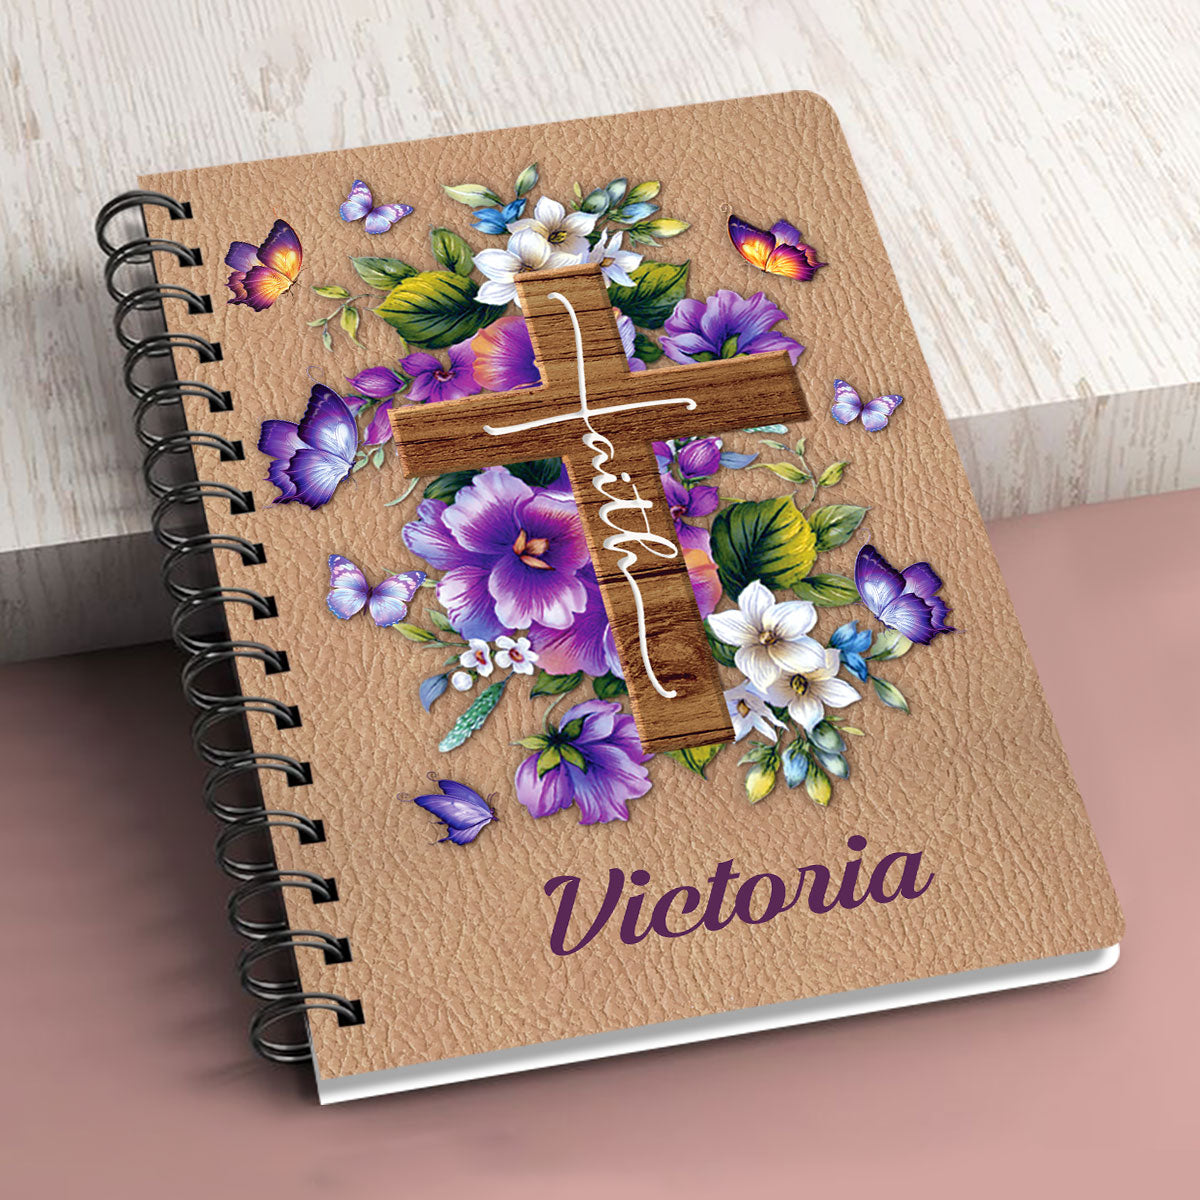 I Still Believe In Amazing Grace Personalized Floral Cross Spiral Notebook, Scripture Gifts For Christian